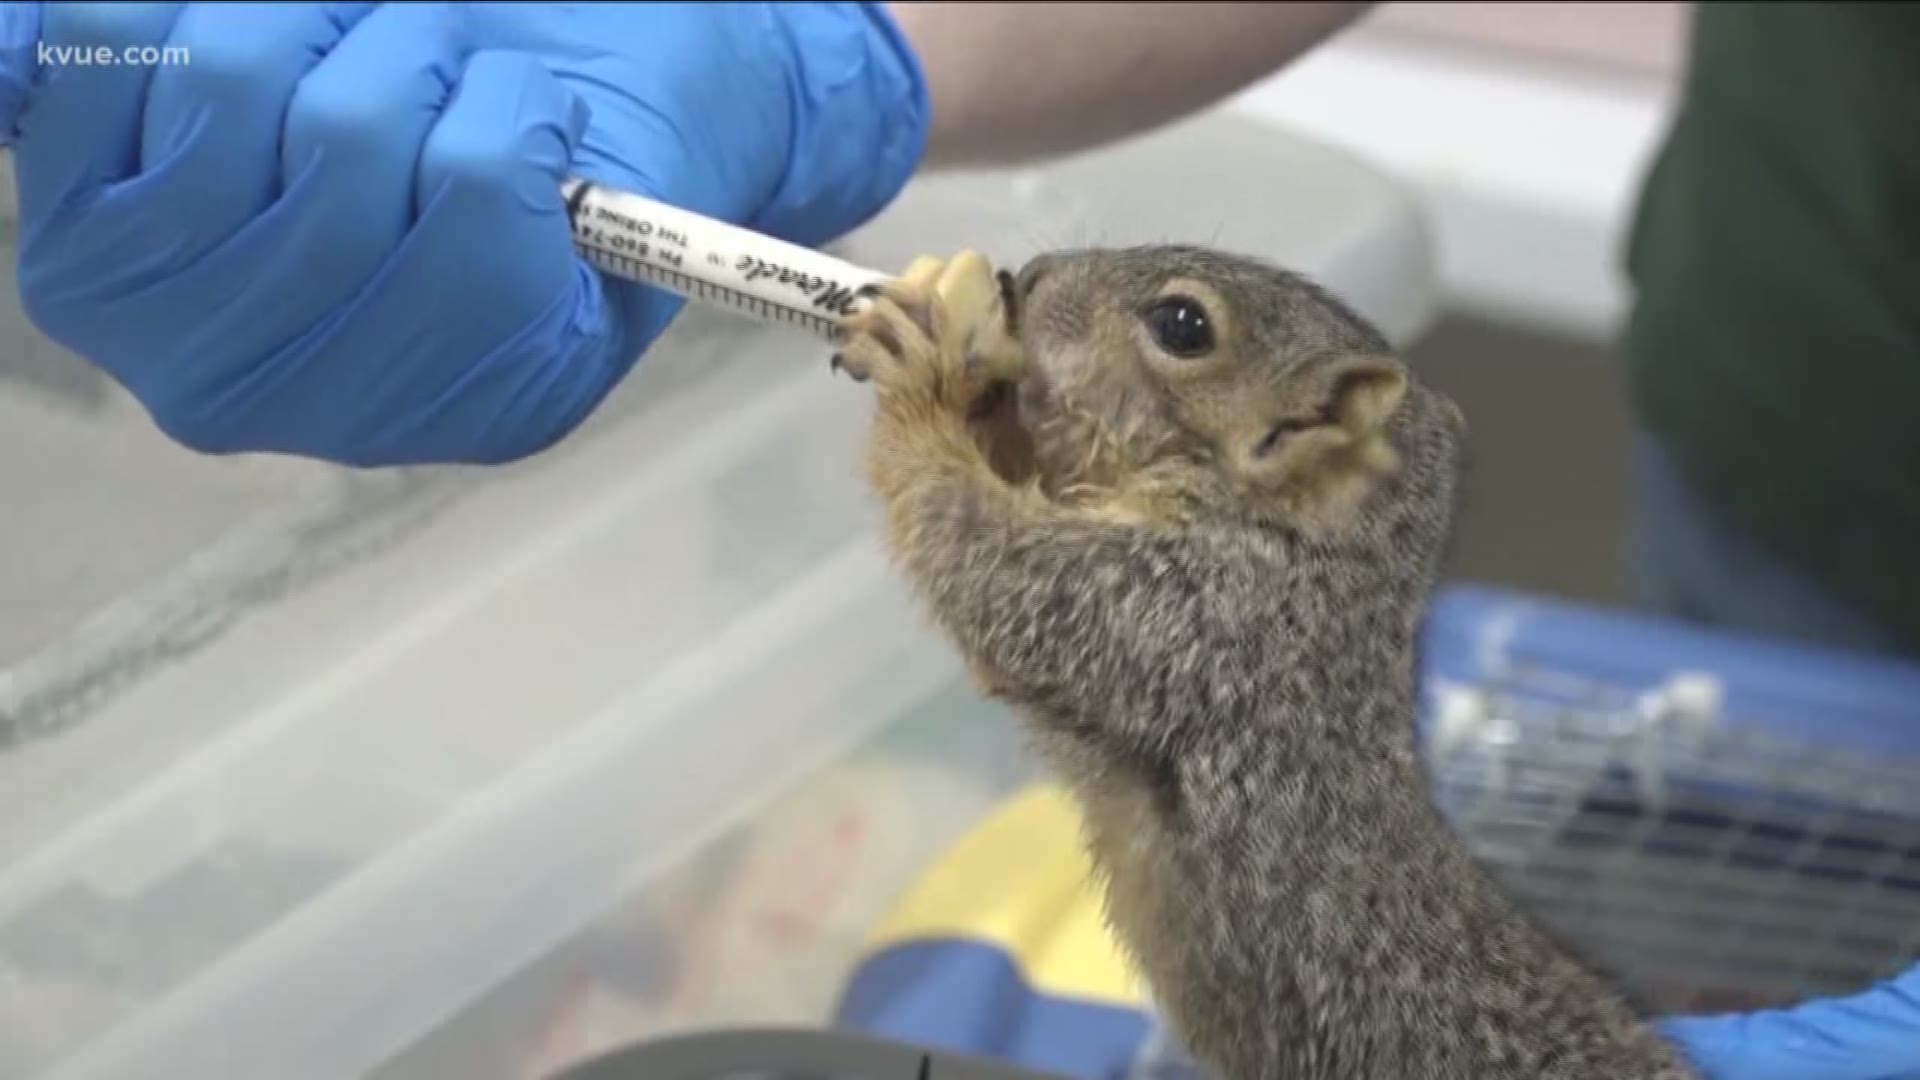 It's that time of the year when animals are having babies so you can expect to see baby squirrels and other wildlife around town. As KVUE's Kalyn Norwood shows us, that also means a busy season for the Animal Wildlife Rescue.